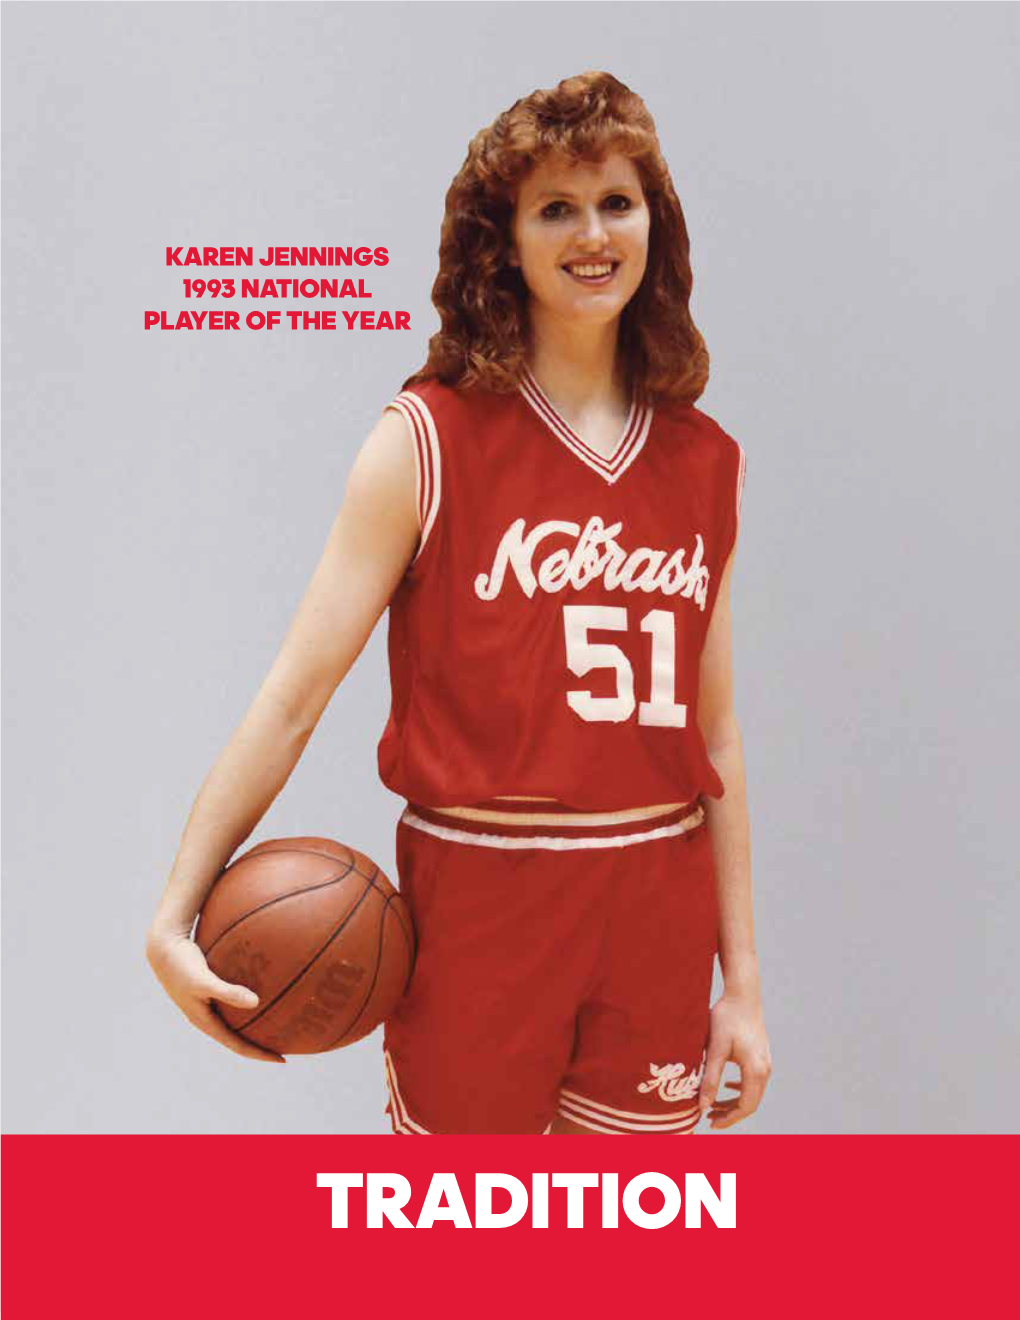 TRADITION 154 2020-21 NEBRASKA WOMEN's BASKETBALL HUSKERS GROW TRADITION with WILLIAMS by Mike Babcock & Jeff Griesch "This Team of Huskers Likes to Practice